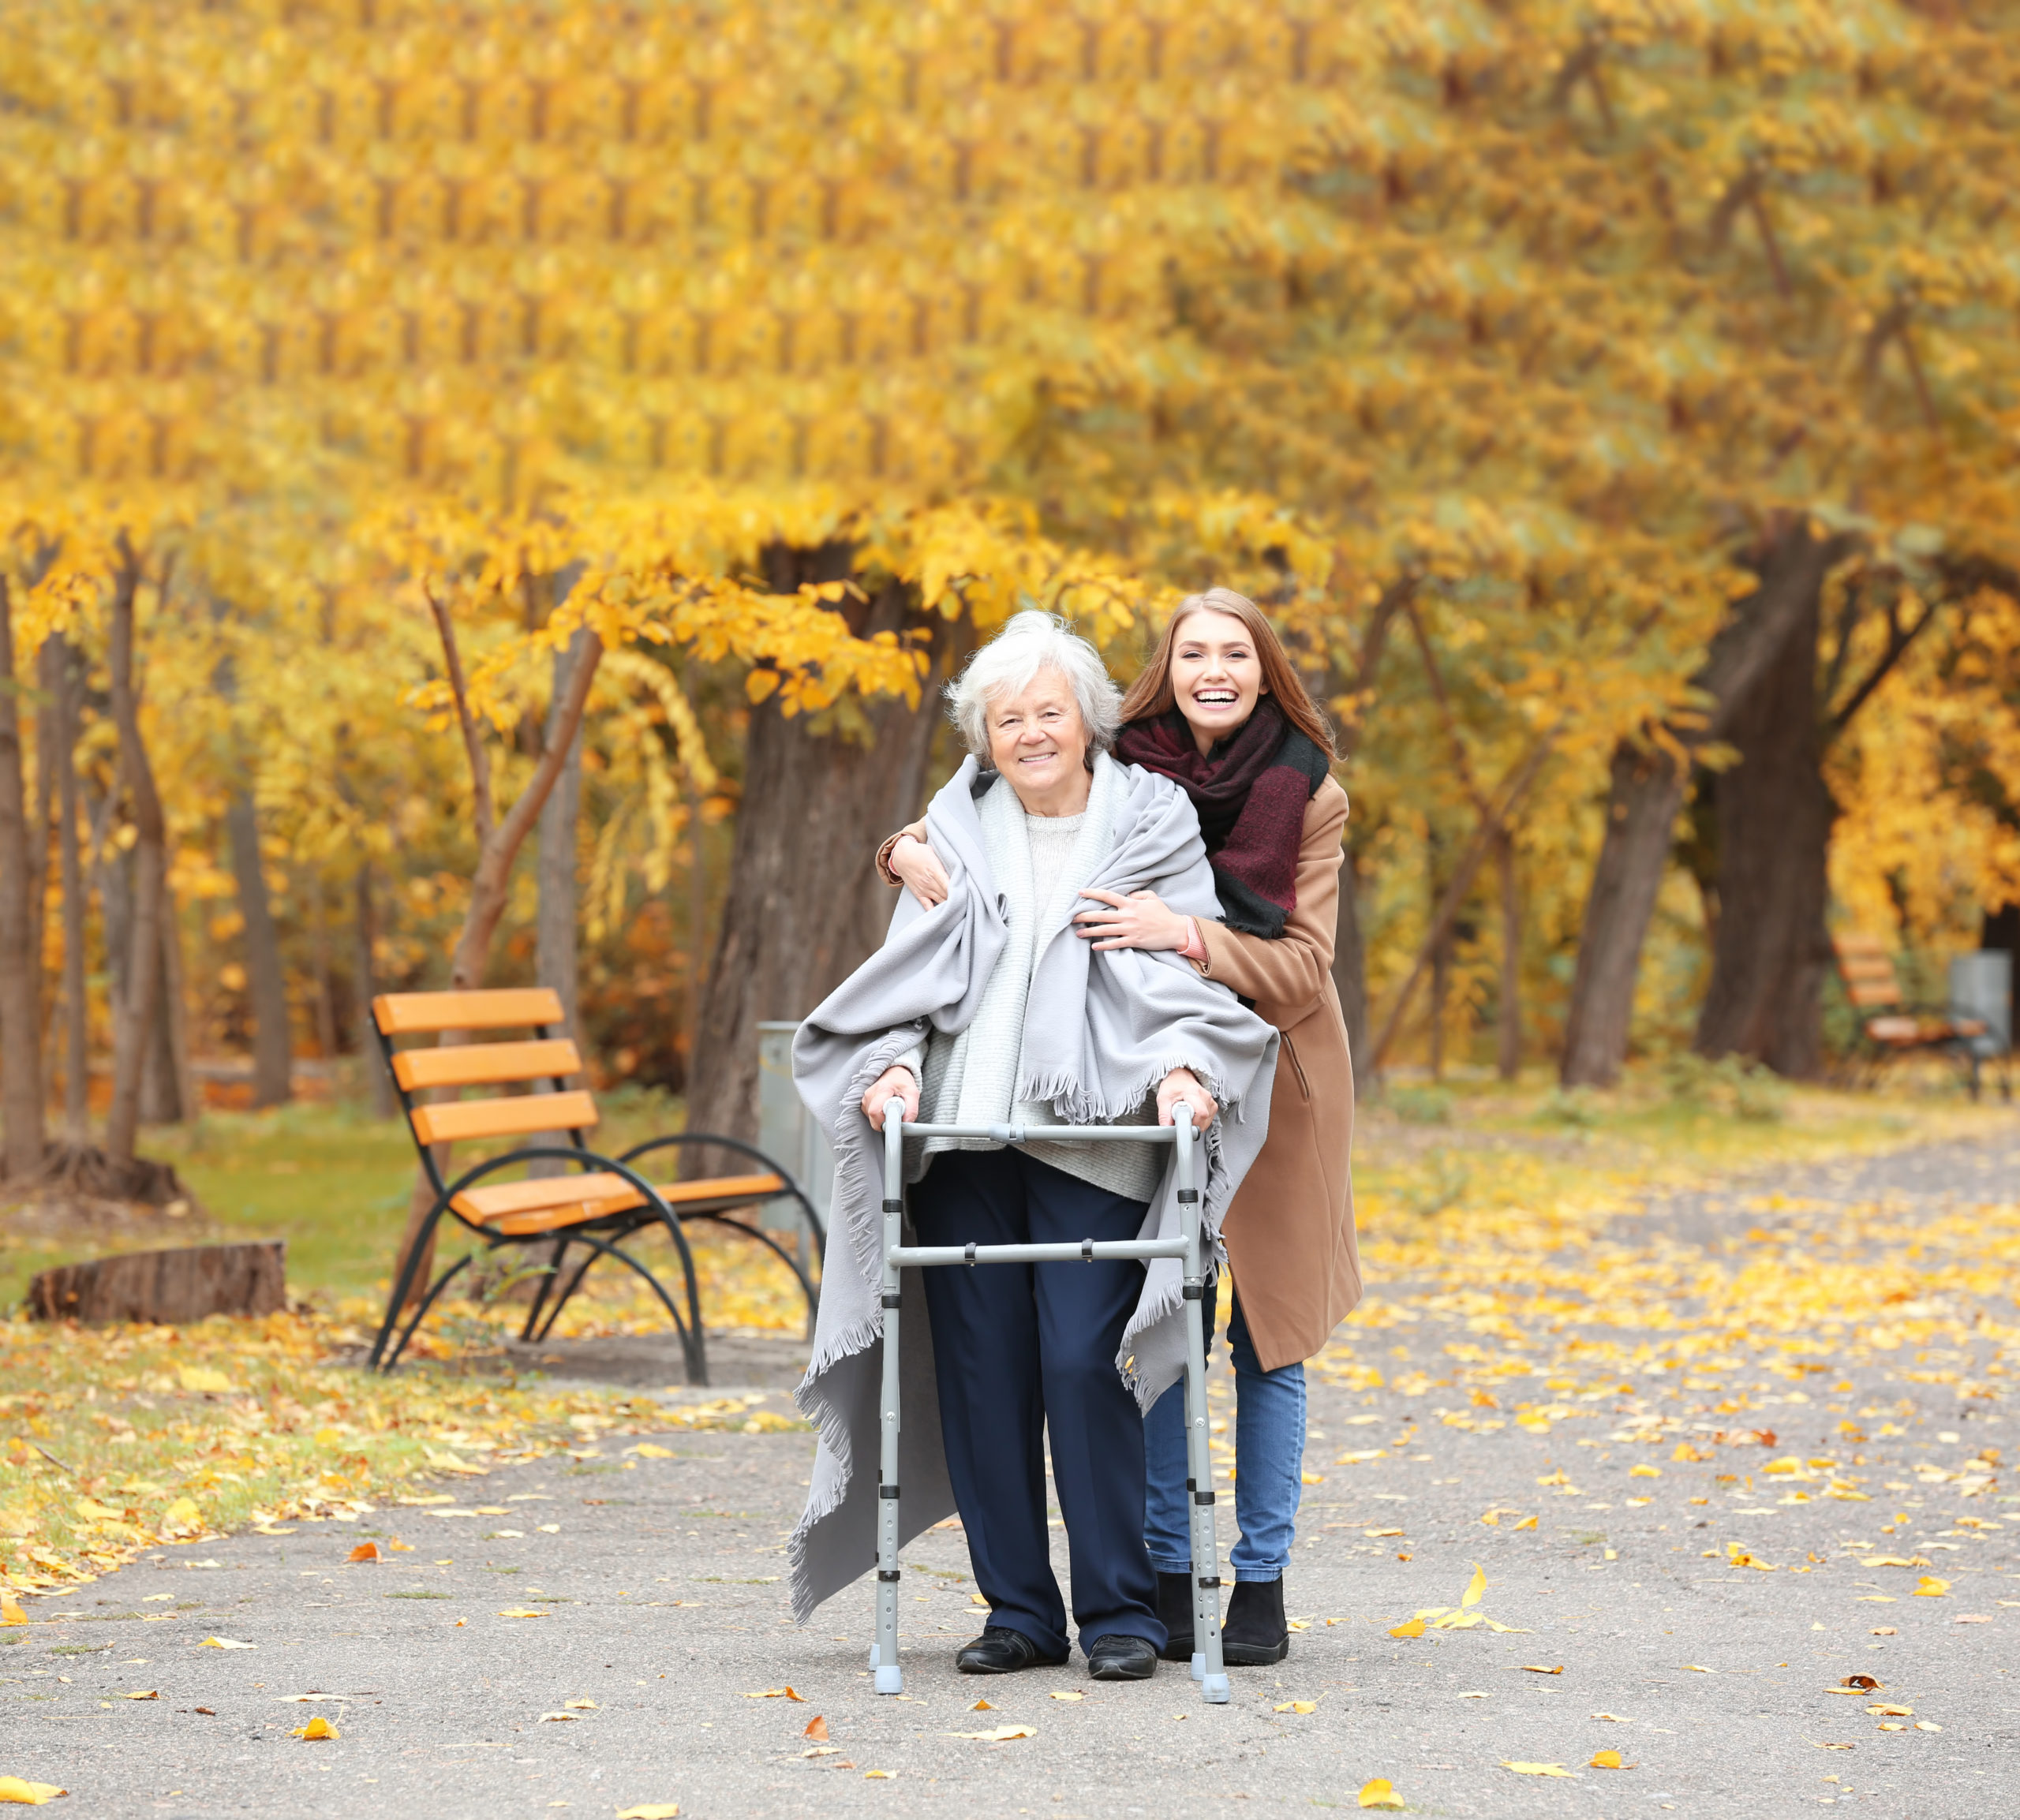 Senior woman with walking frame and young caregiver in park